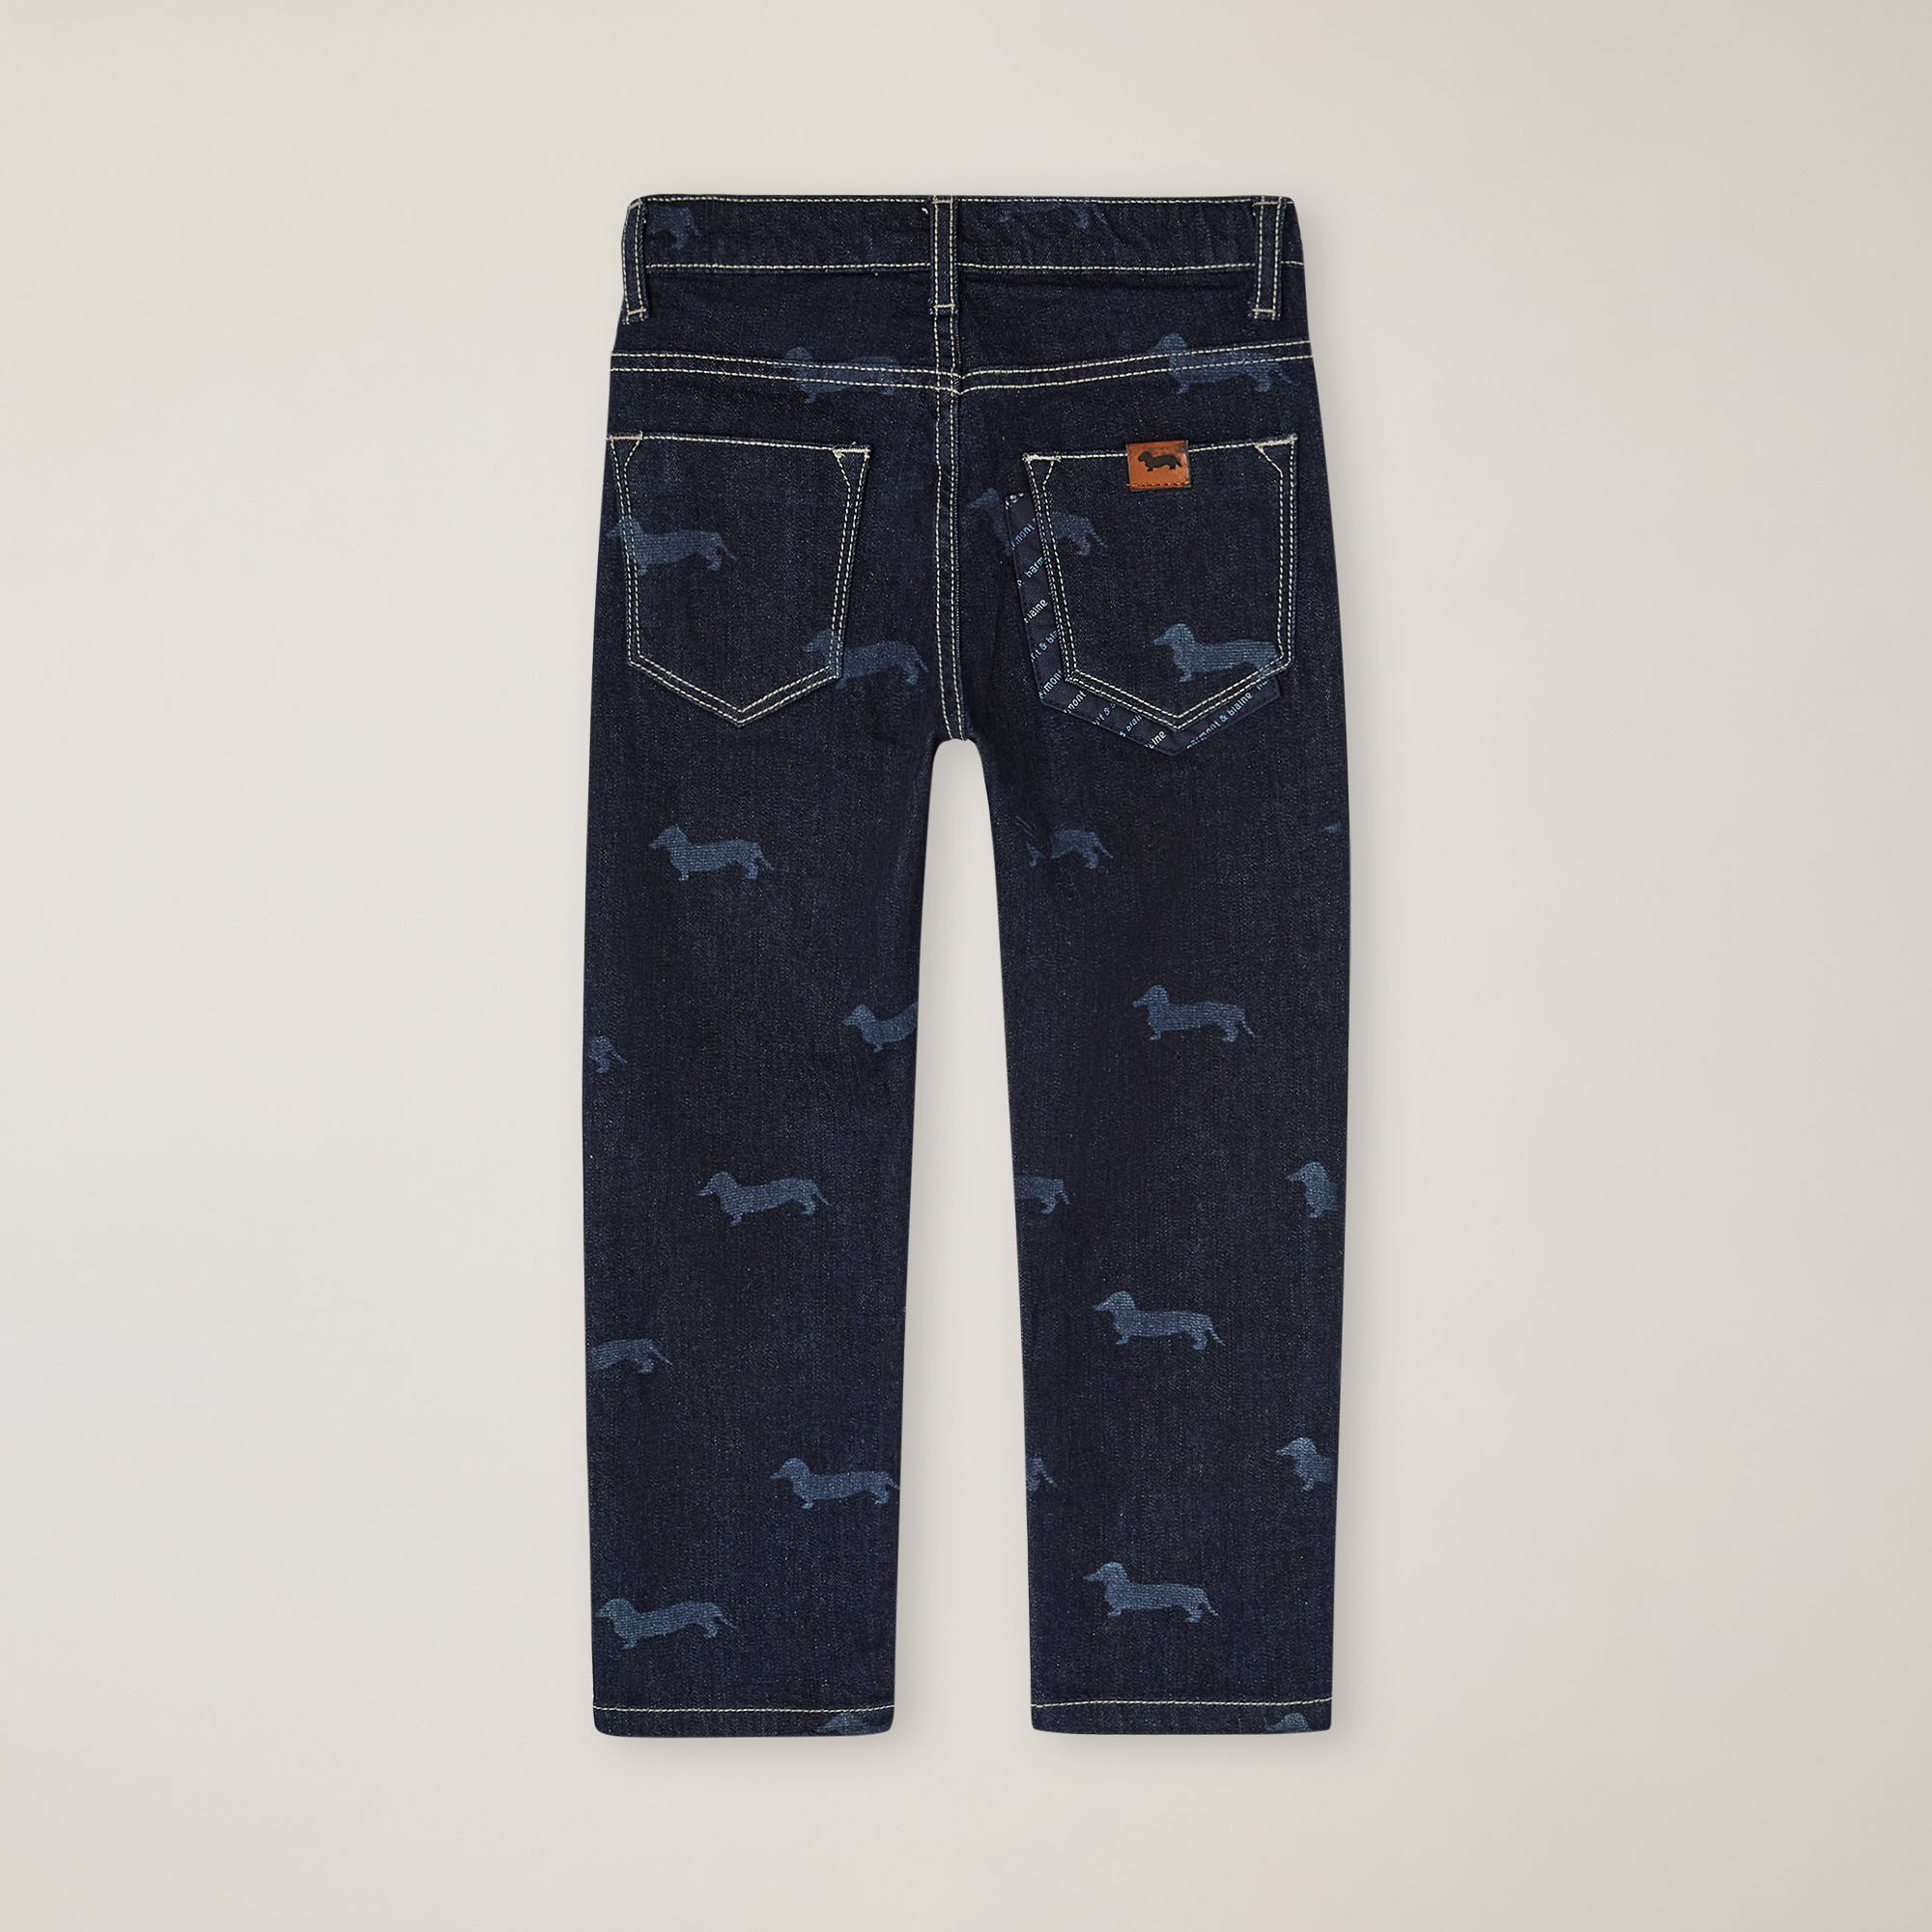 Denim with all-over Dachshunds